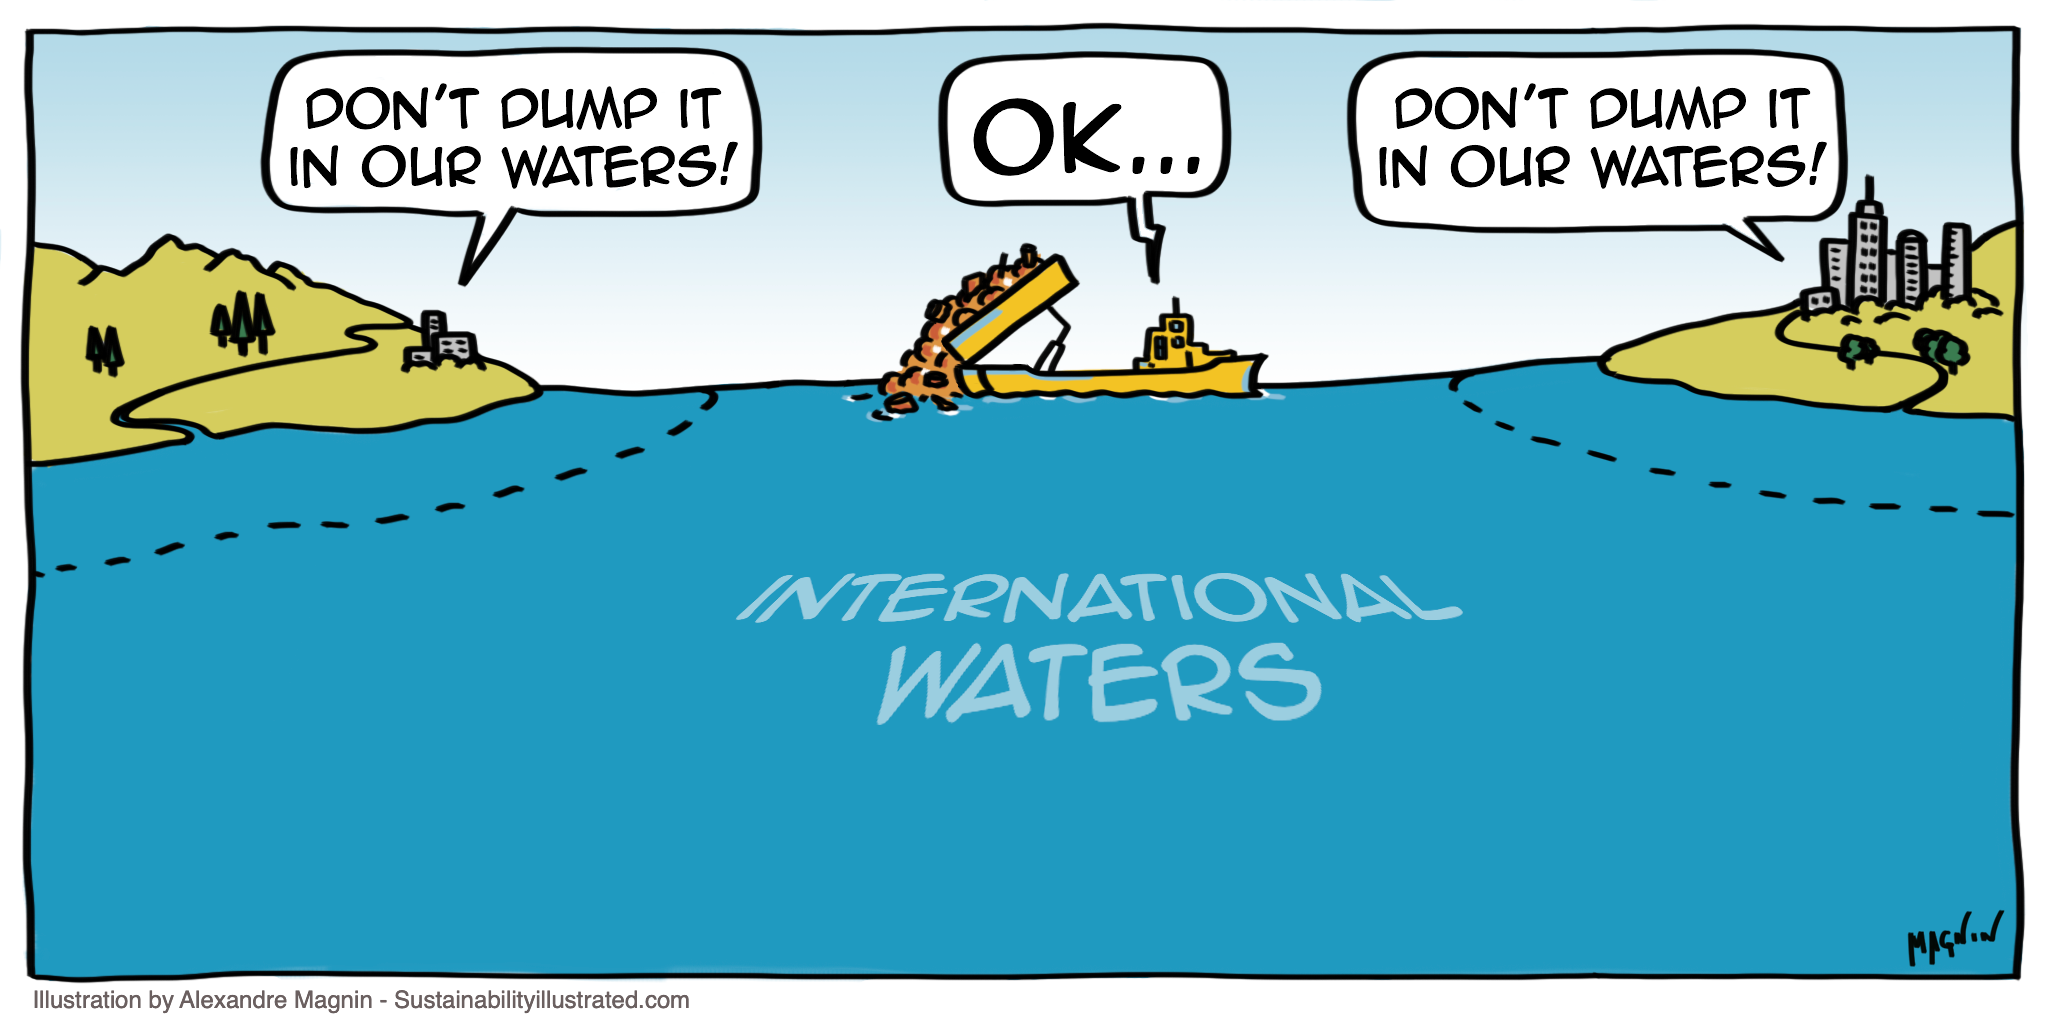 Pollution of our oceans: paradox? (cartoon #25) – Sustainability Illustrated